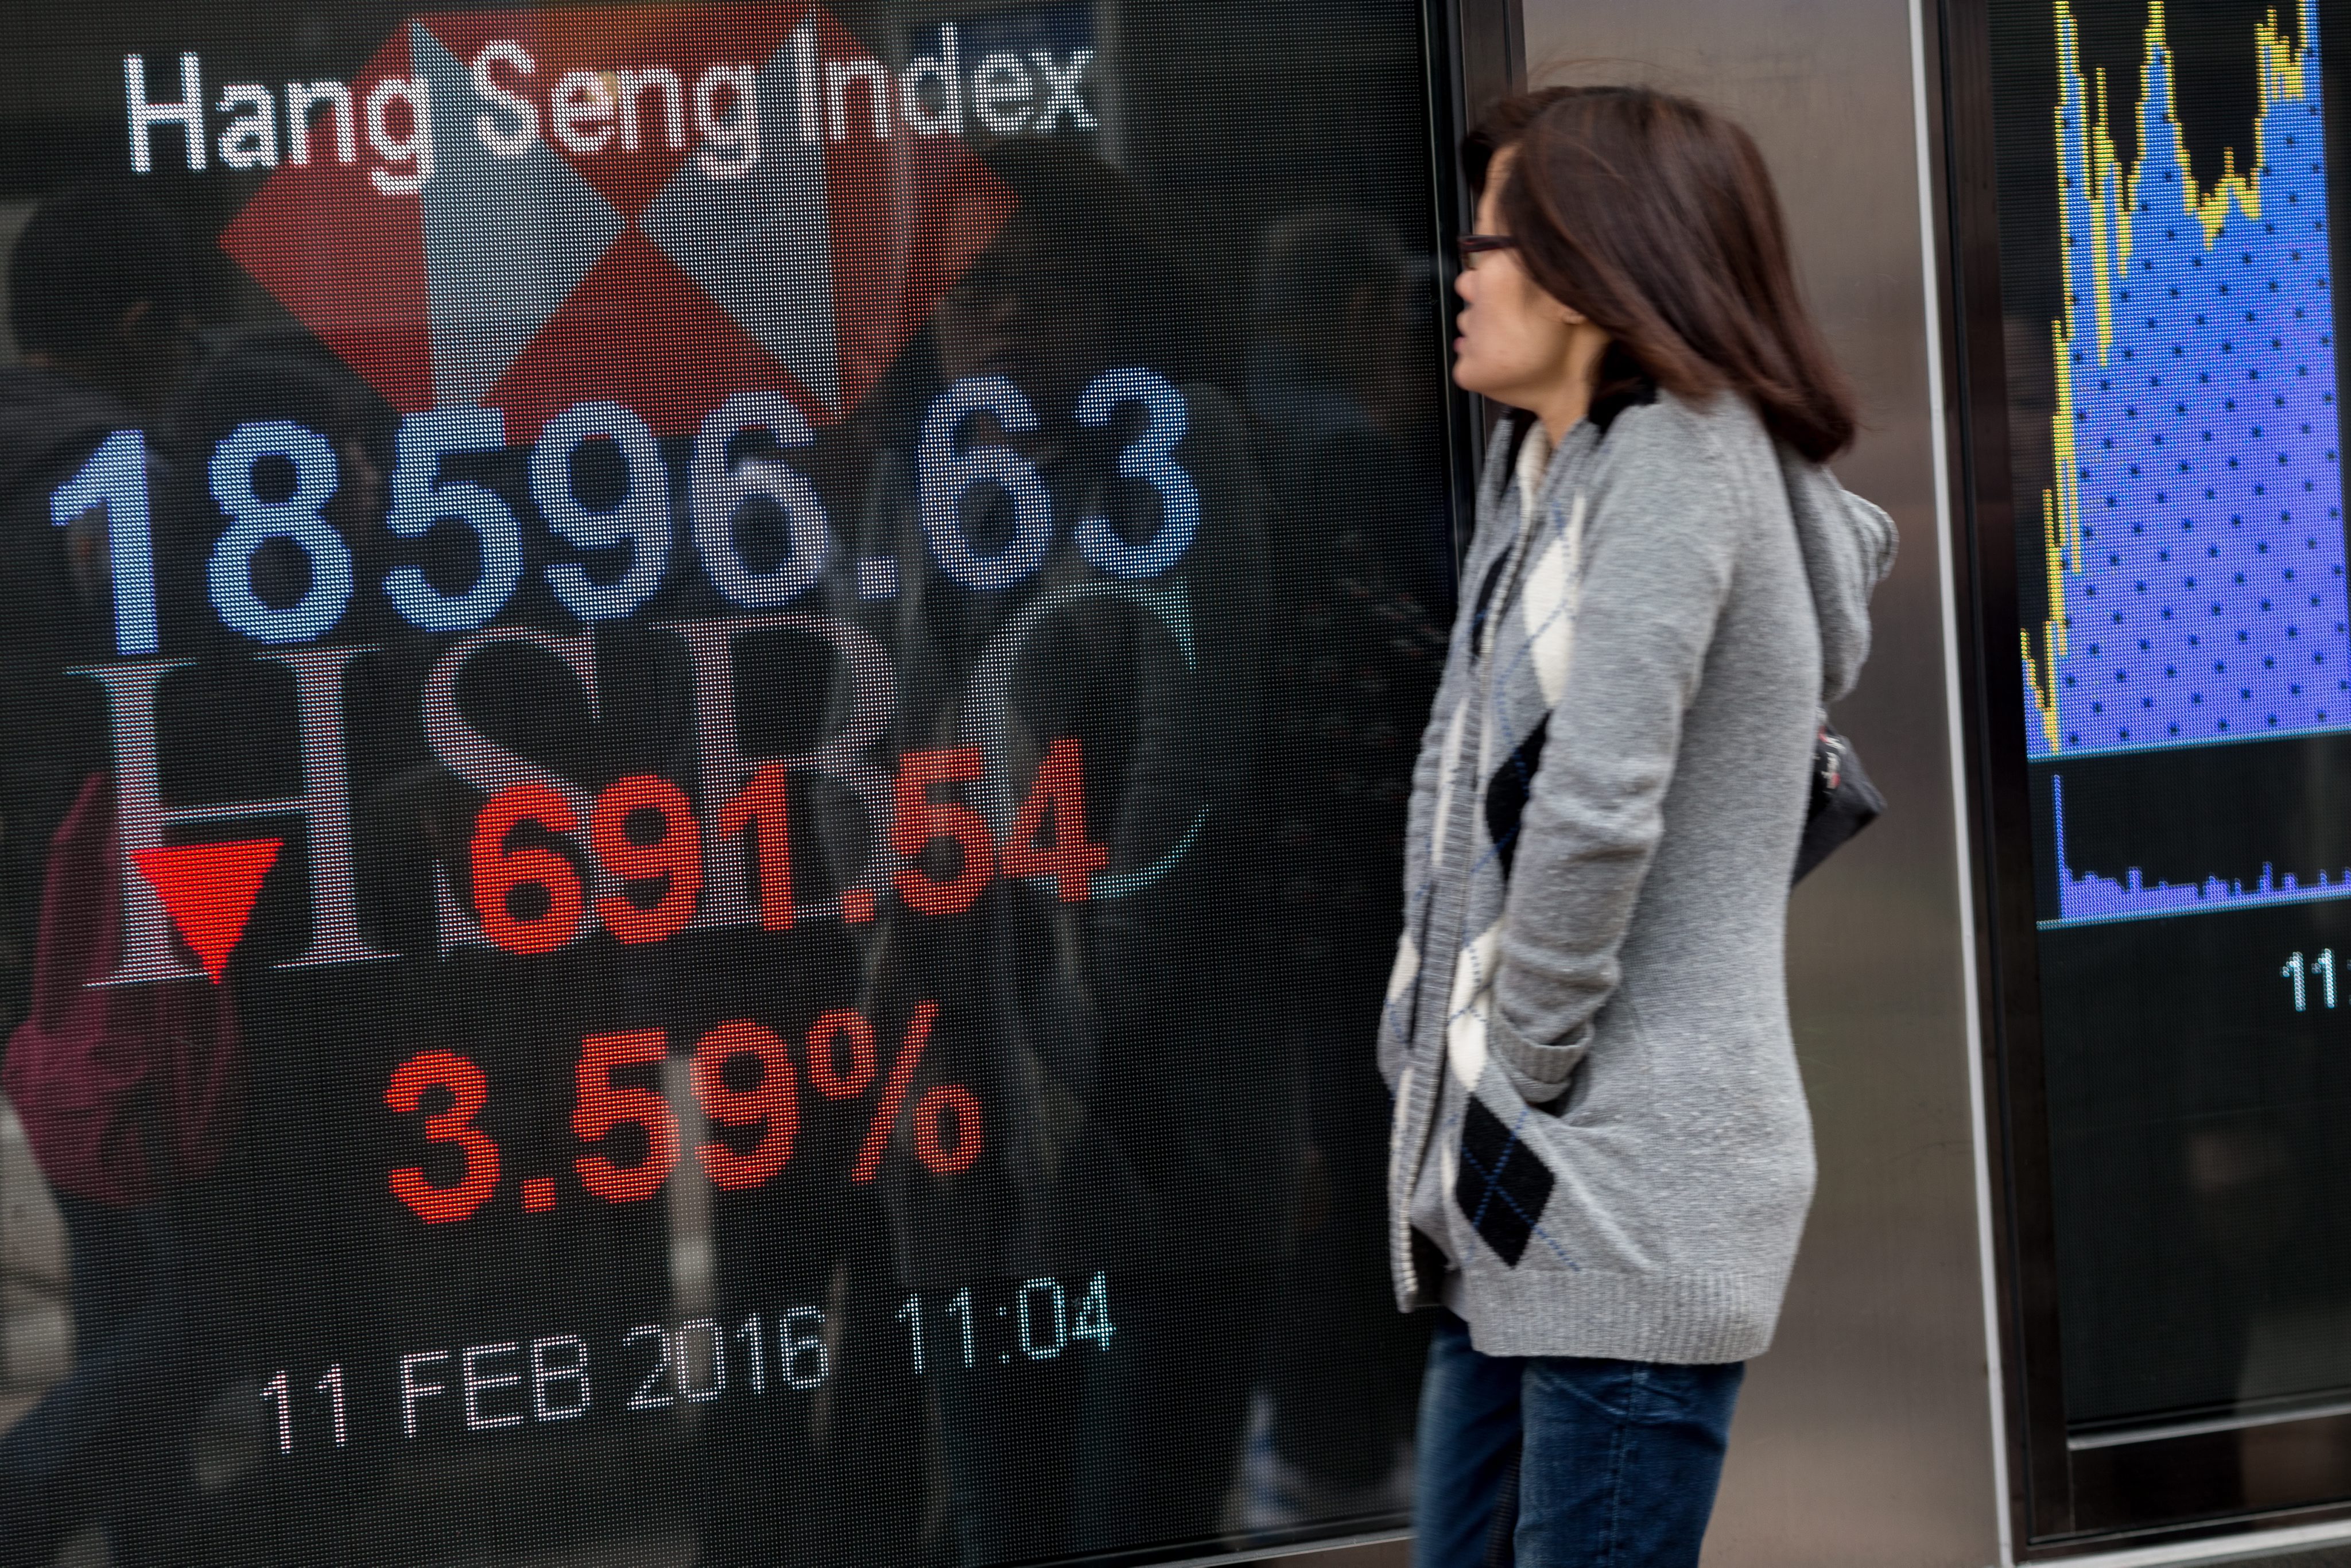 epa05153559 A woman looks at an electronic billboard displaying the Hang Seng Index numbers in Hong Kong, China, 11 February 2016. The Hang Seng Index slumped 3.8 percent in the morning as markets reopened following a three-day trading break, headed for their worst start to a lunar new year since 1994 . EPA/JEROME FAVRE